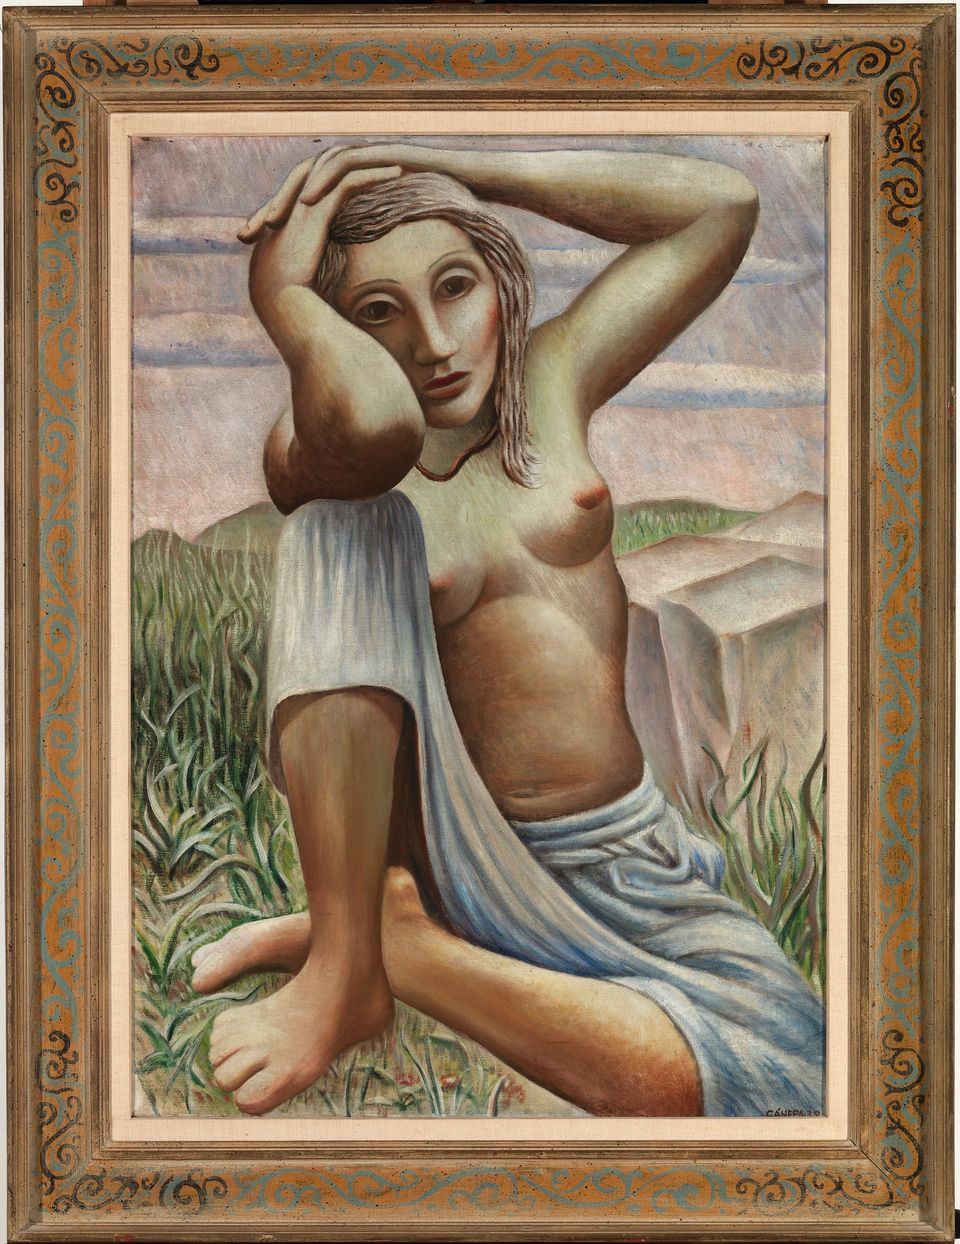 A painting of a woman sitting down with her hands in her hair. 